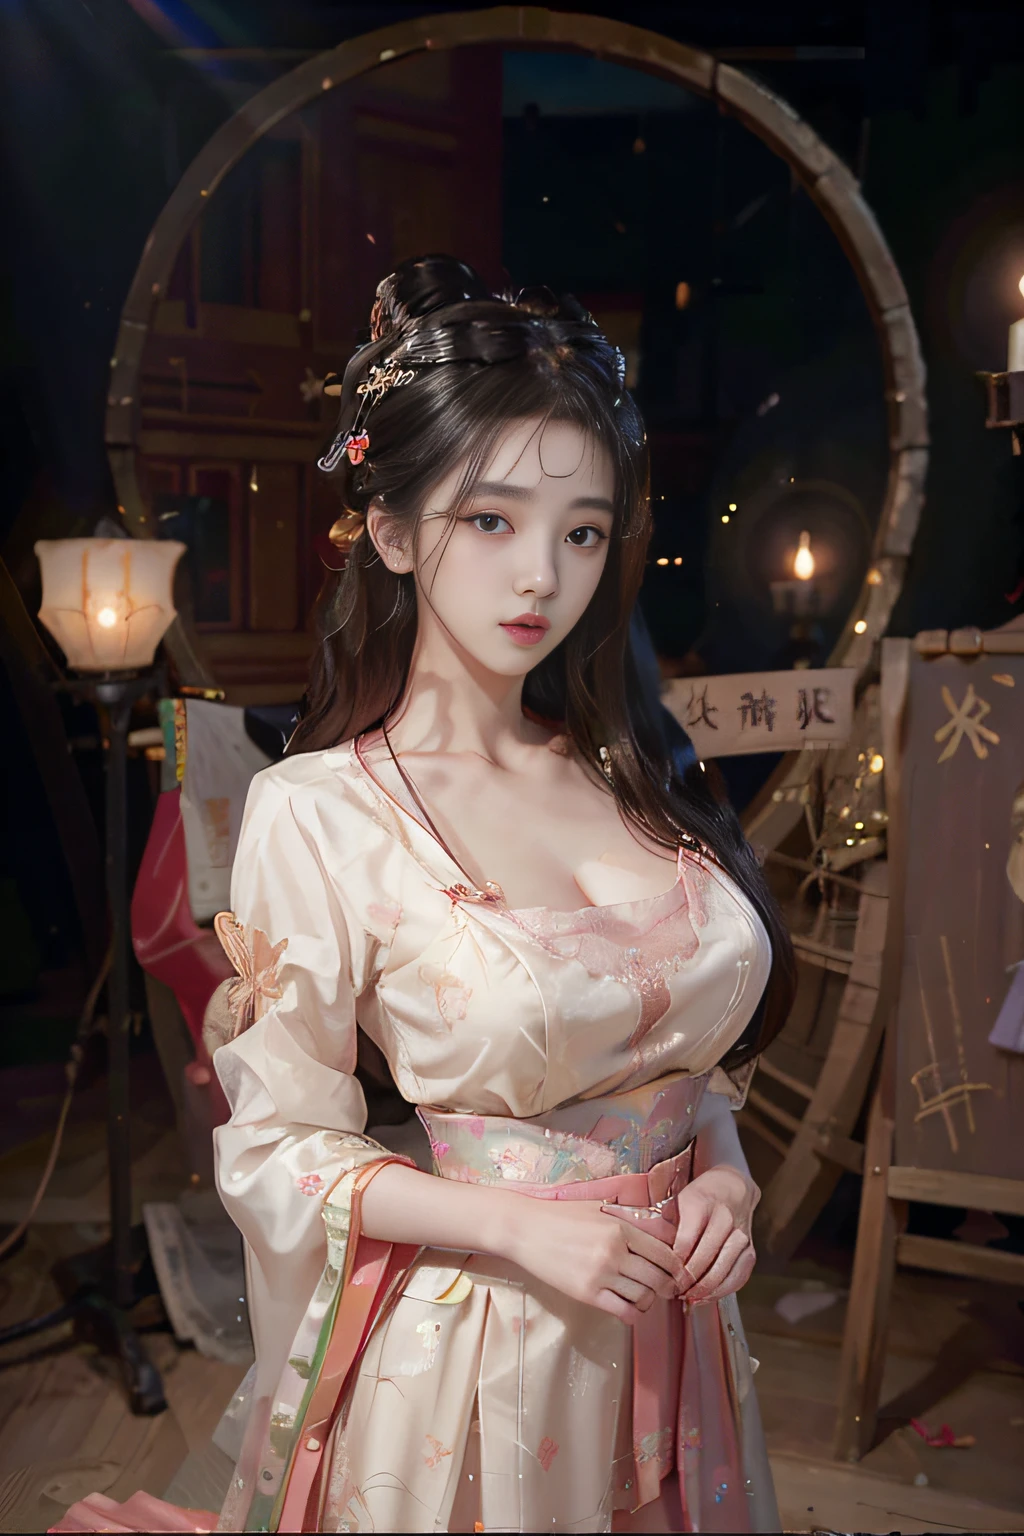 8k, RAW Photo, Best Quality, Masterpiece: 1.2), (Realistic, Photo Realistic: 1.4), {{{1girl}}},, Depth of Field, Full Body, Cinematic Lighting, princess 8 yeald old cute, (huge ，cleavage), Beautiful Facial Features, Beautiful Body, Sweating, , Depth of Field, Skin, Ears, Pale Skin, Best Quality, Masterpiece, Illustration, an extremely deciple and beautiful, extremely detailed,CG,unity,8k wallpaper,amazing,finely detail,master,best quality,official art,extremely detailed CG unity 8k wallpaper,ridiculous,incredibly ridiculous,huge file size, super verbose, high resolution, very verbose, Beautiful detailed girl, very detailed eyes and face, beautiful detailed eyes, light on face, (Hanfu: 1.1), lace silk thin, petticoat white pink green